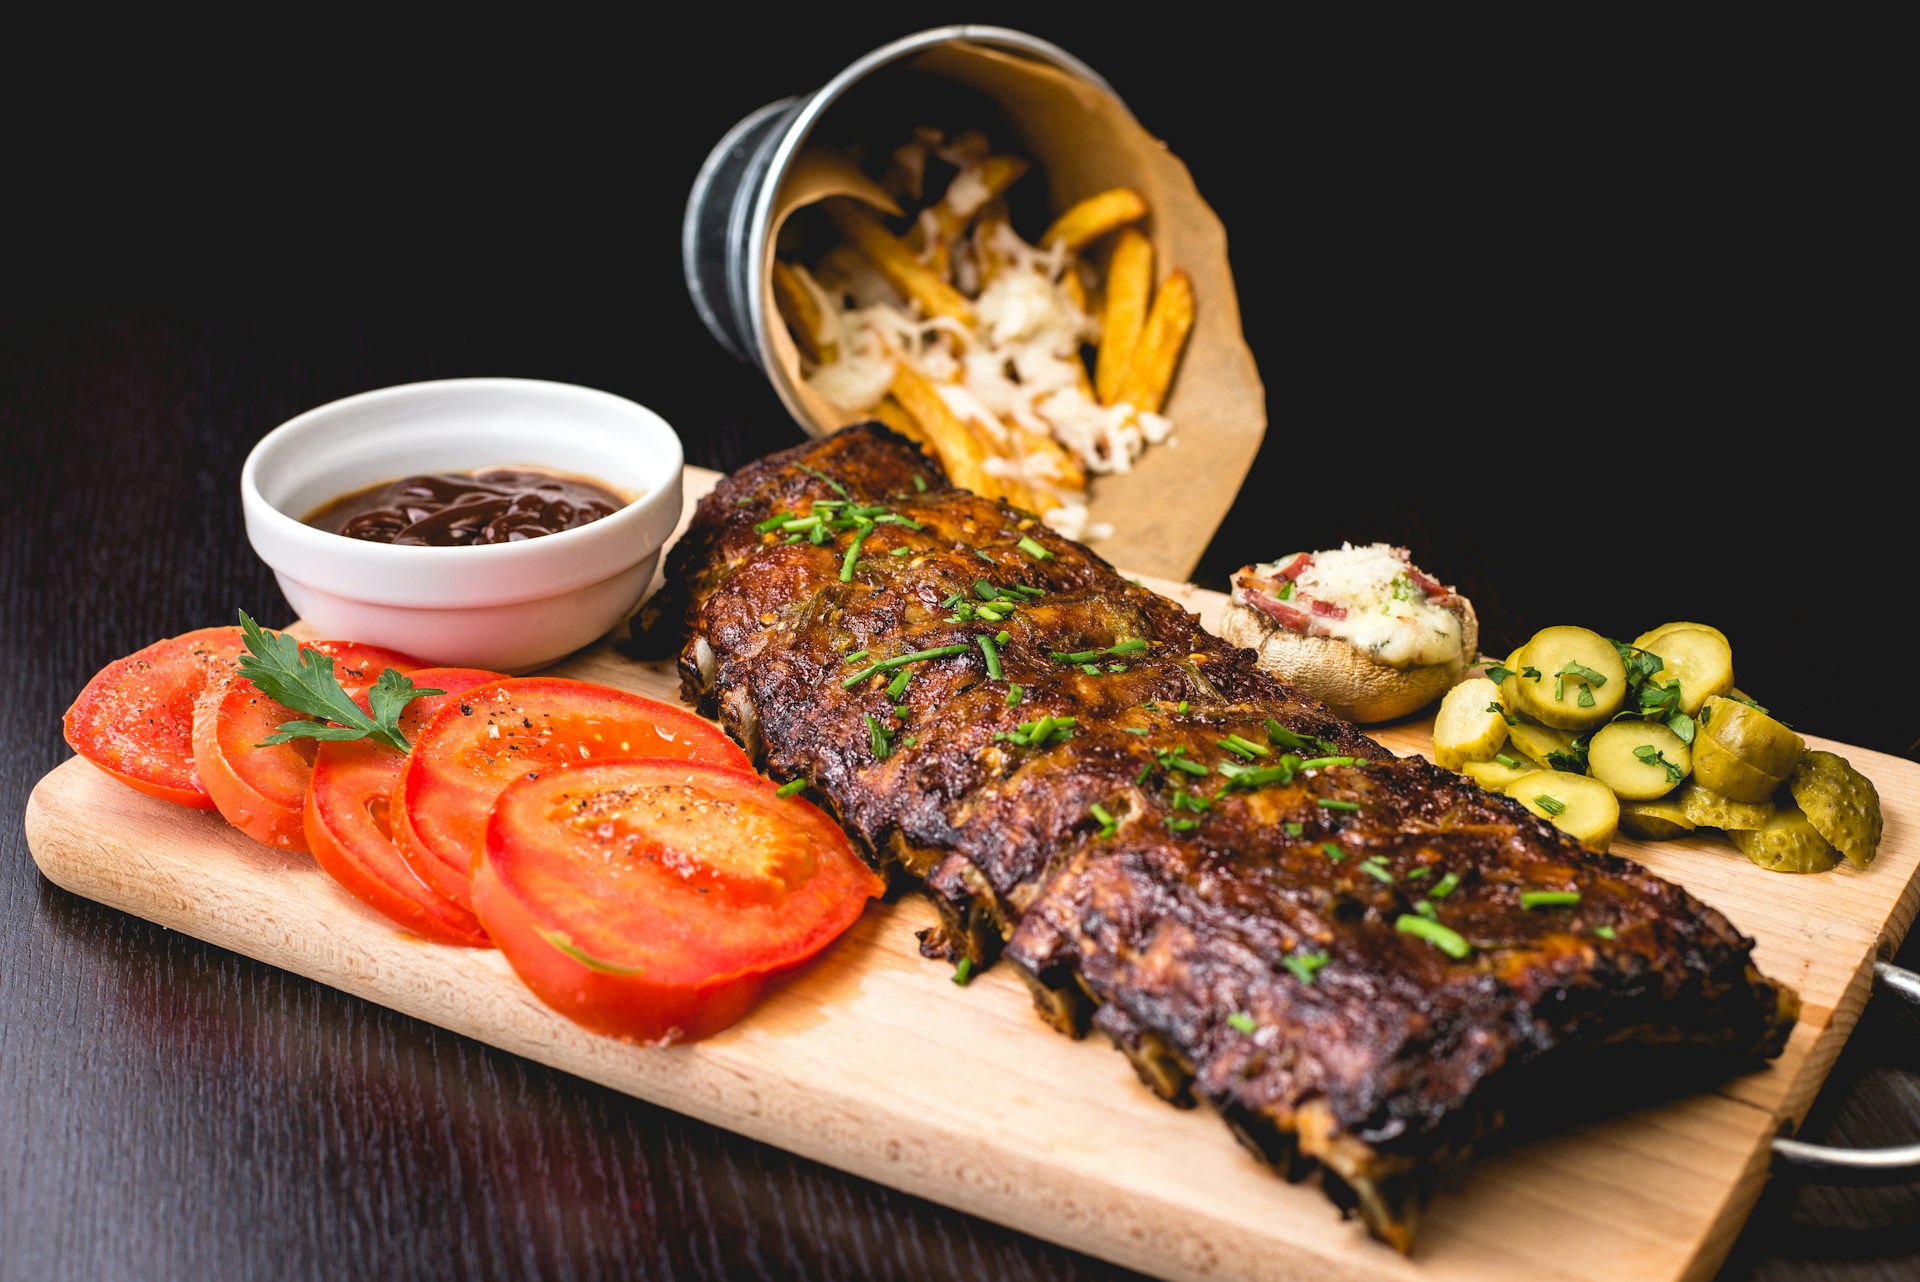 Plate of ribs with tomatoes 